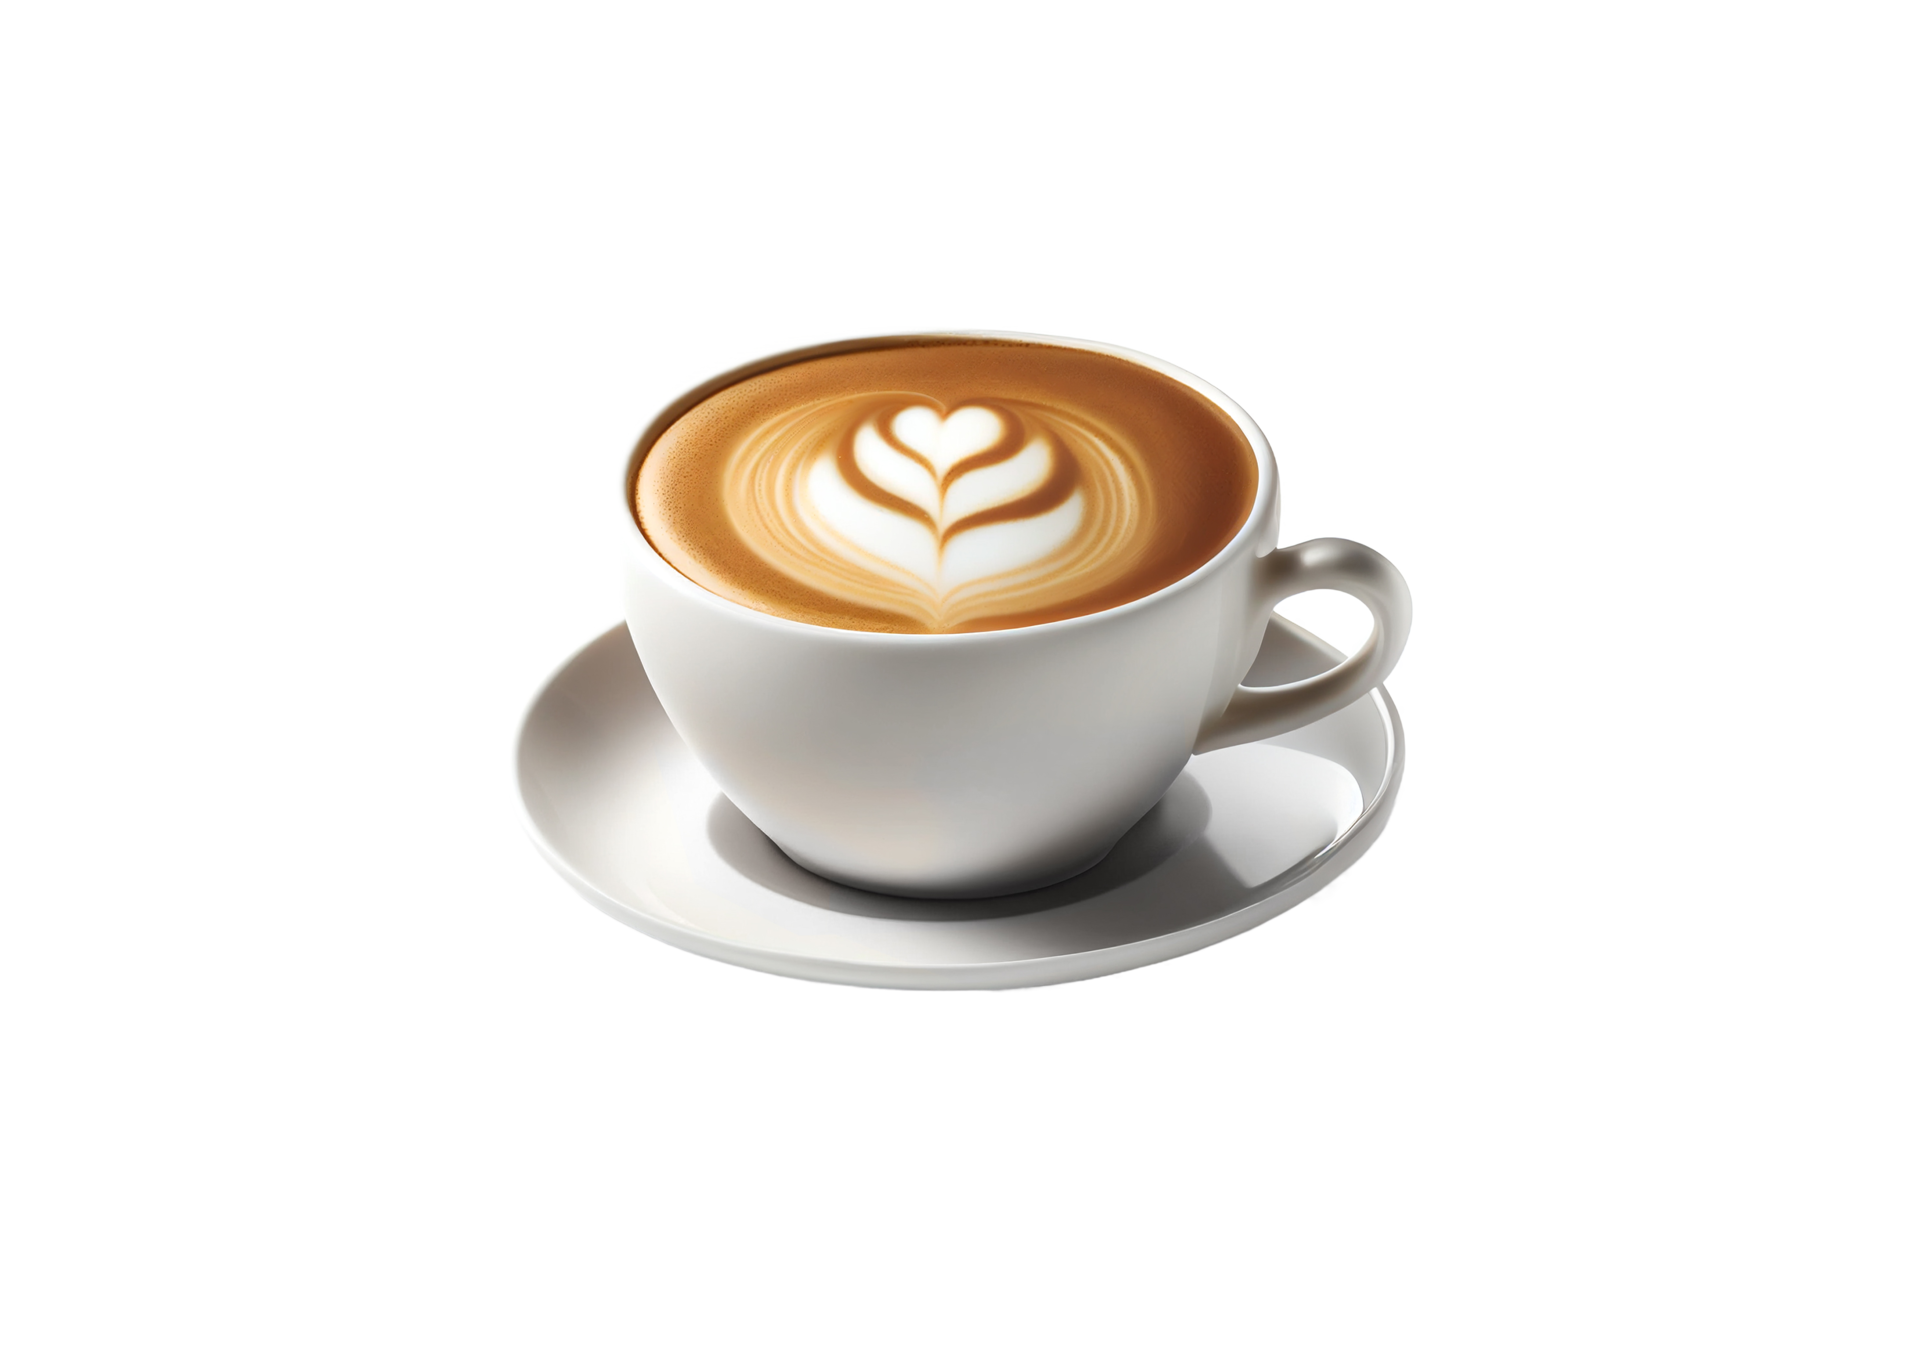 https://static.vecteezy.com/system/resources/previews/023/450/138/original/side-view-of-hot-latte-coffee-with-heart-latte-art-created-with-generative-ai-png.png